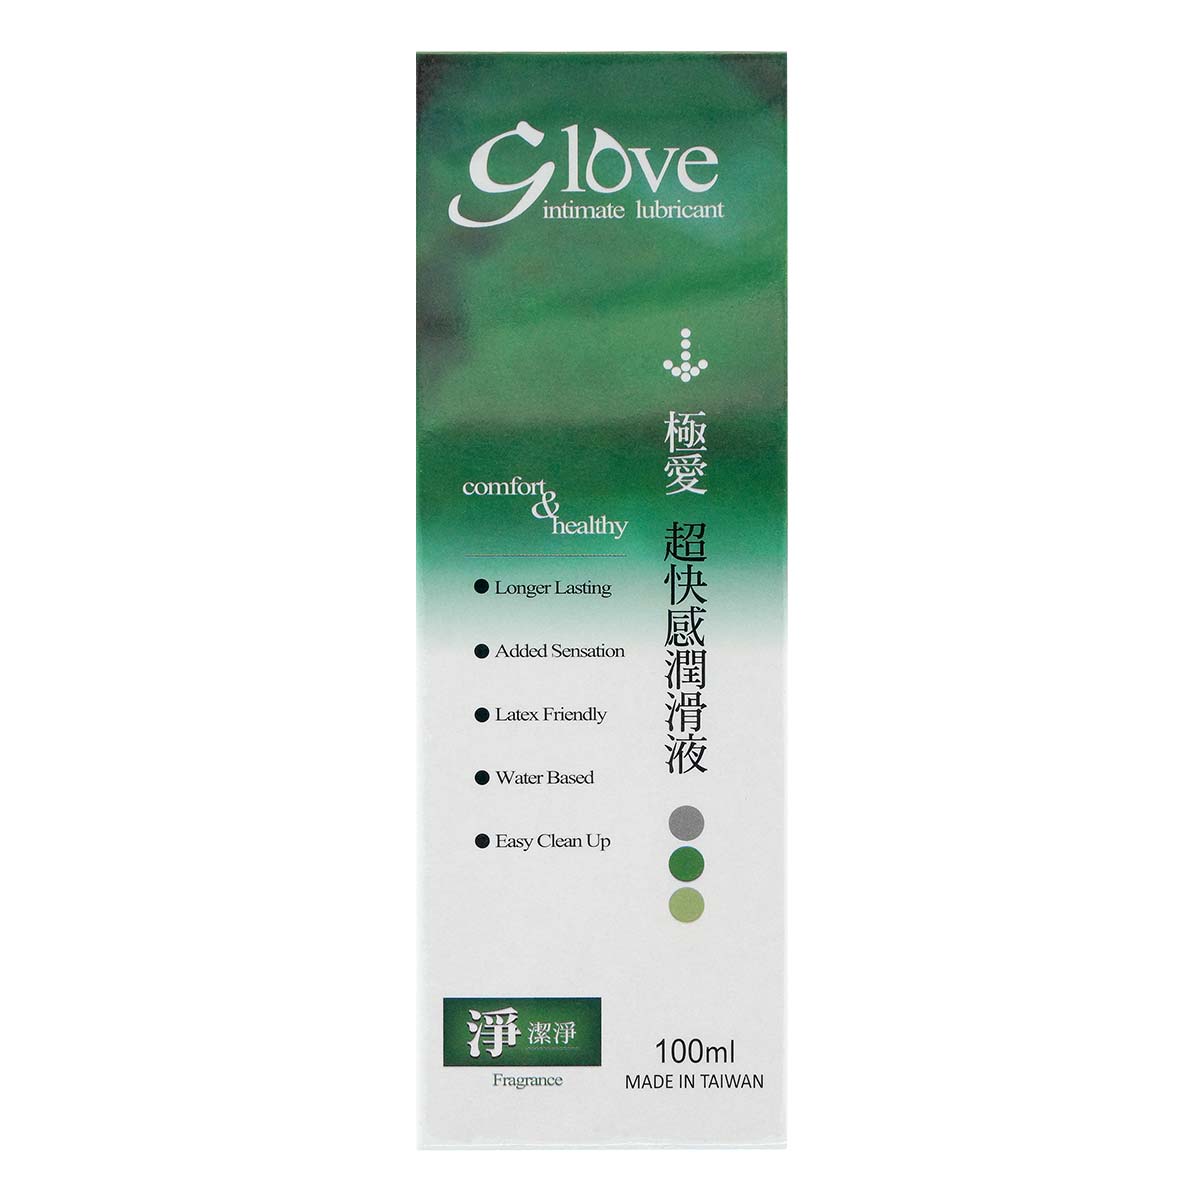 G Love intimate lubricant [Fragrance] 100ml Water-based Lubricant-p_2